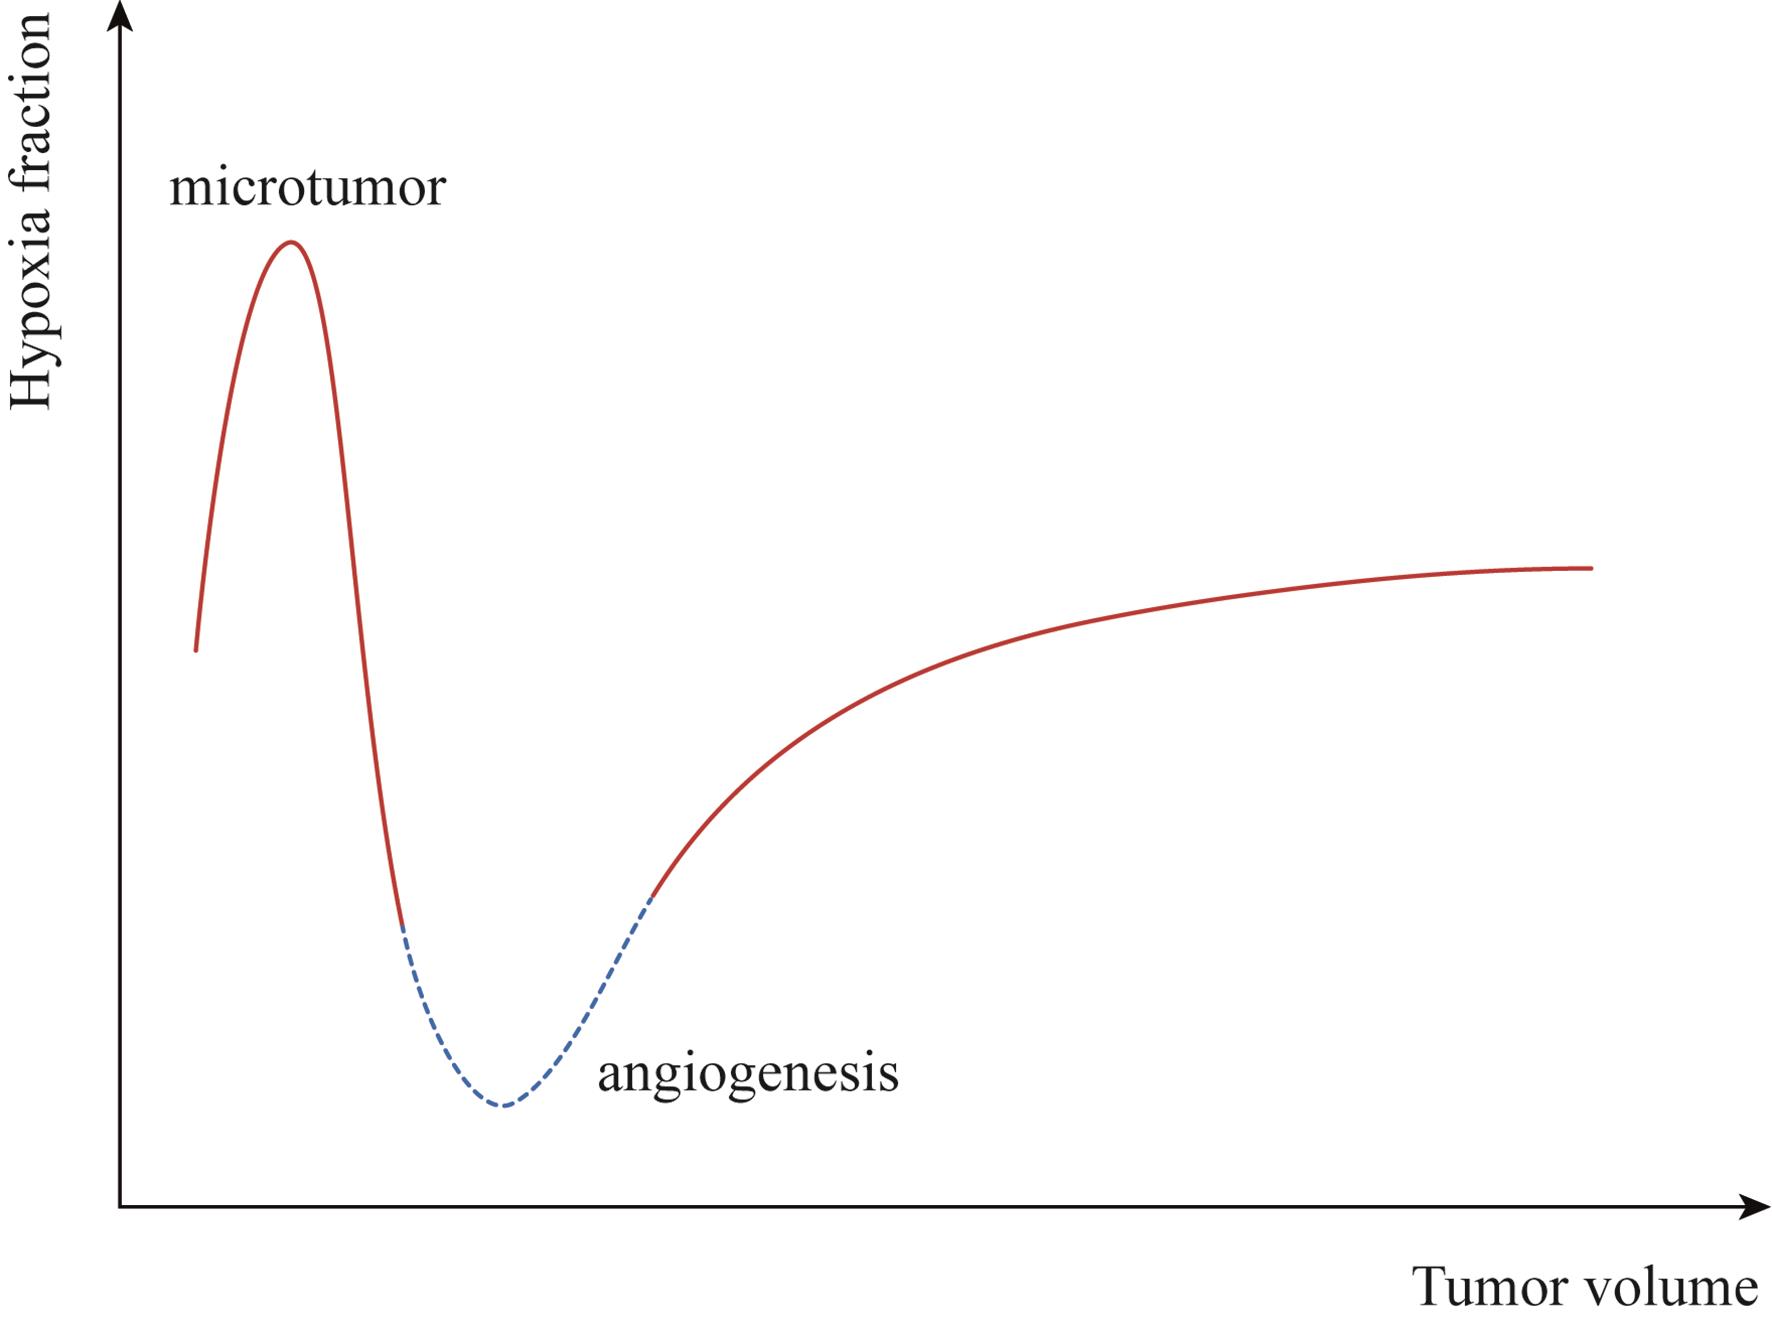 Development of hypoxia during tumor growth: a conceptual diagram based on currently available data. Before the onset of angiogenesis, the microtumor depends upon diffusion for oxygen and nutrients; following angiogenesis, the hypoxic fraction steadily increases in a clinically detectable tumor.